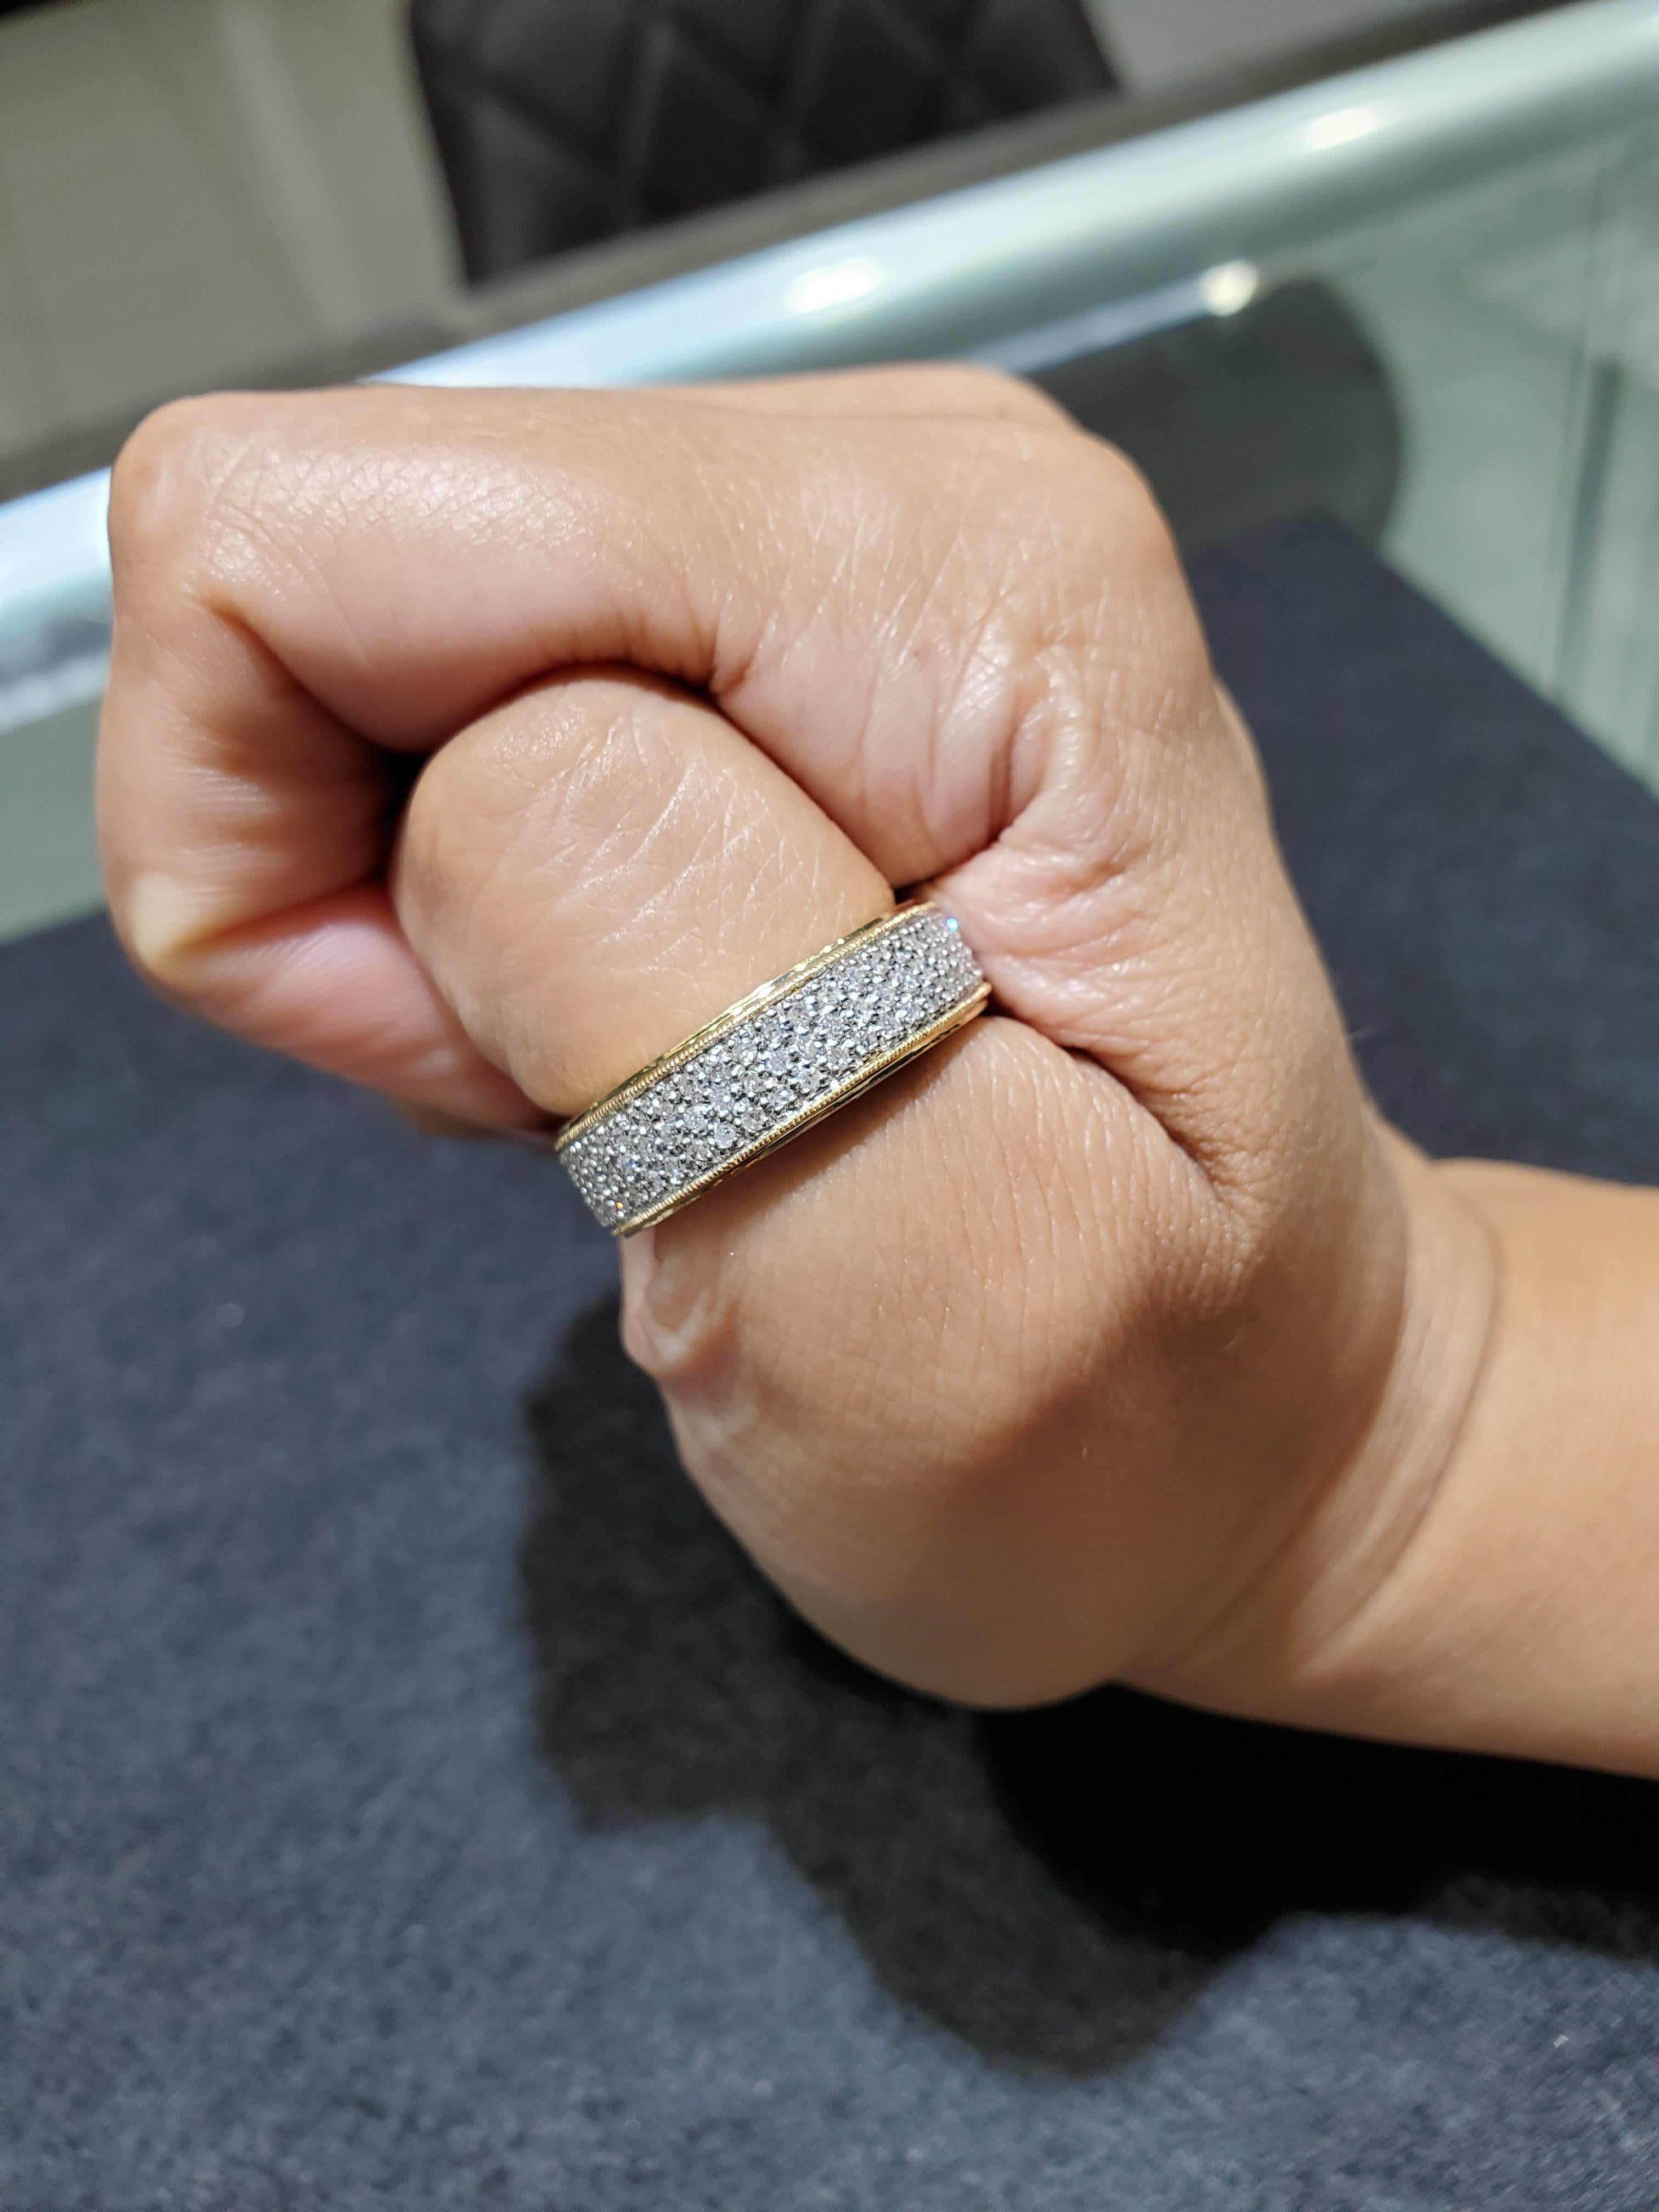 ♥ Product Summary ♥

Main Stone: Diamond
Approx. Total Diamond Carat Weight: .83cttw
Diamond Color: G/H
Diamond Clarity: I2/I3
Diamond Cut: Round
Number of Stones: 129 
Band Material: Solid 14k Gold
Band Width: 7mm
Size: 9
**Size on this ring cannot